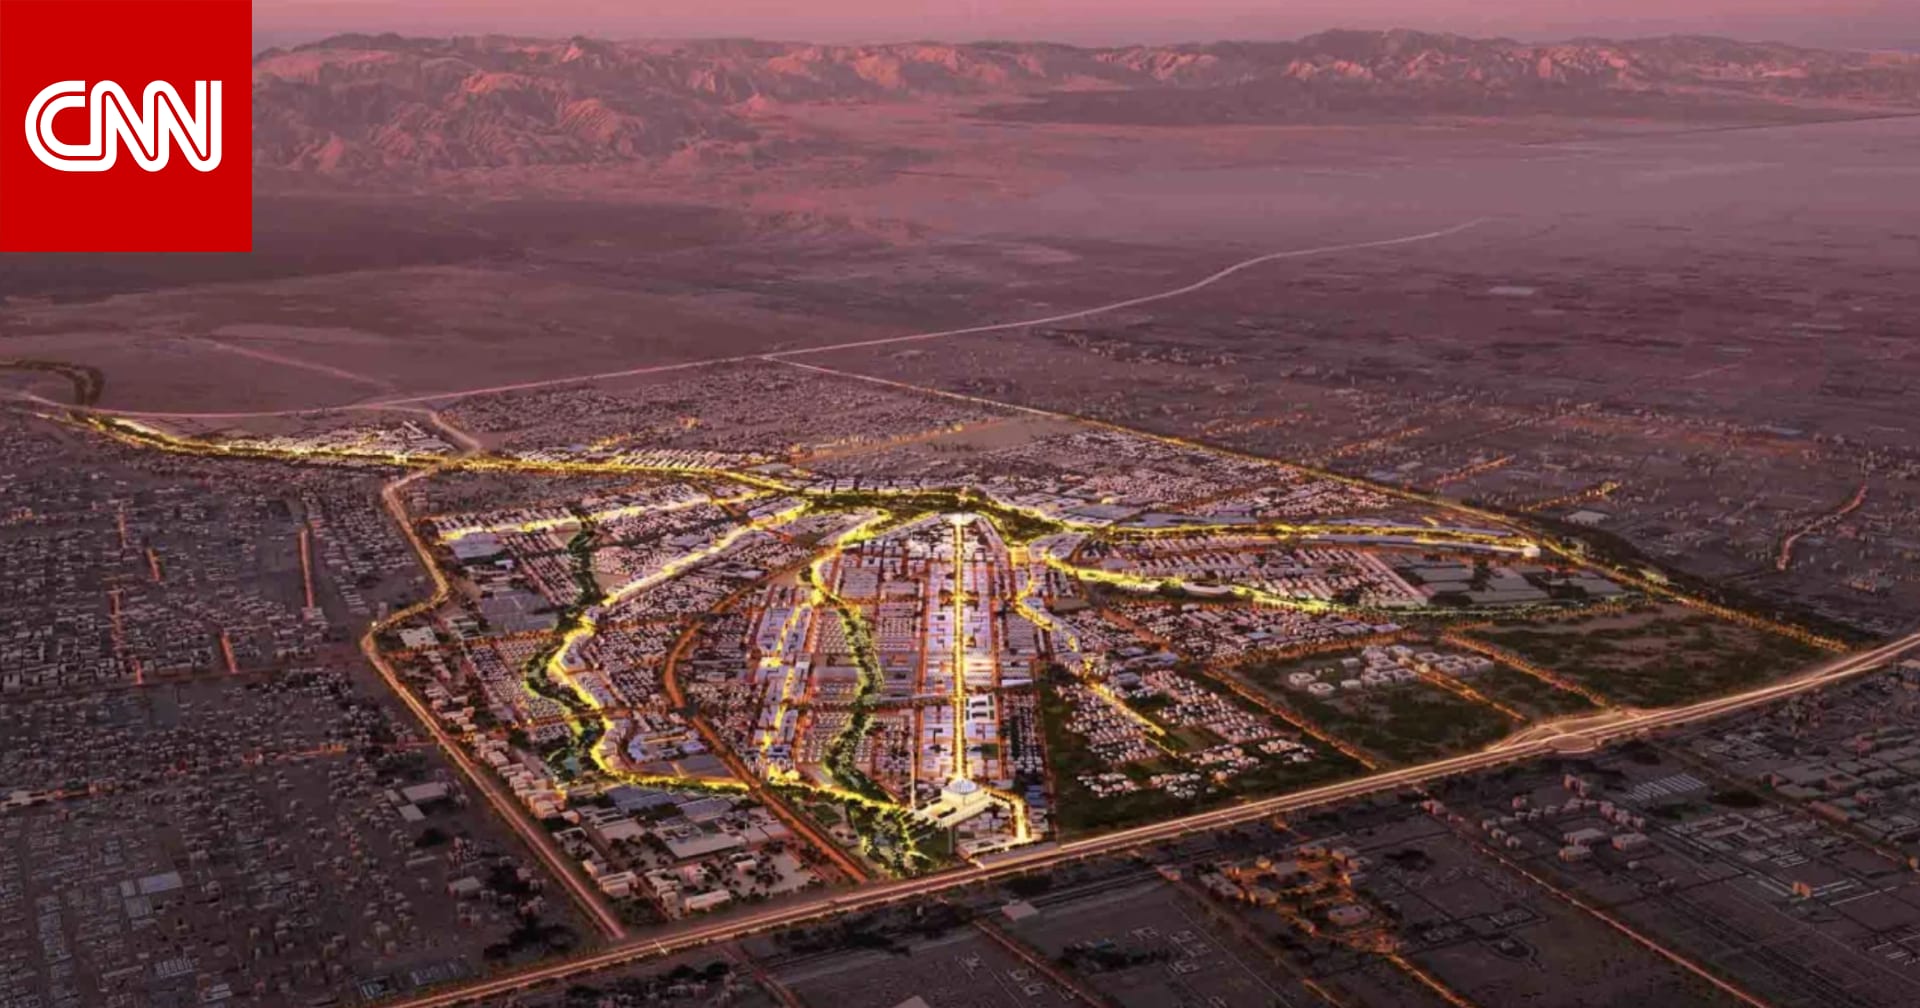 In Oman, plans to build a “smart city” with a capacity of 100,000 people have been revealed.